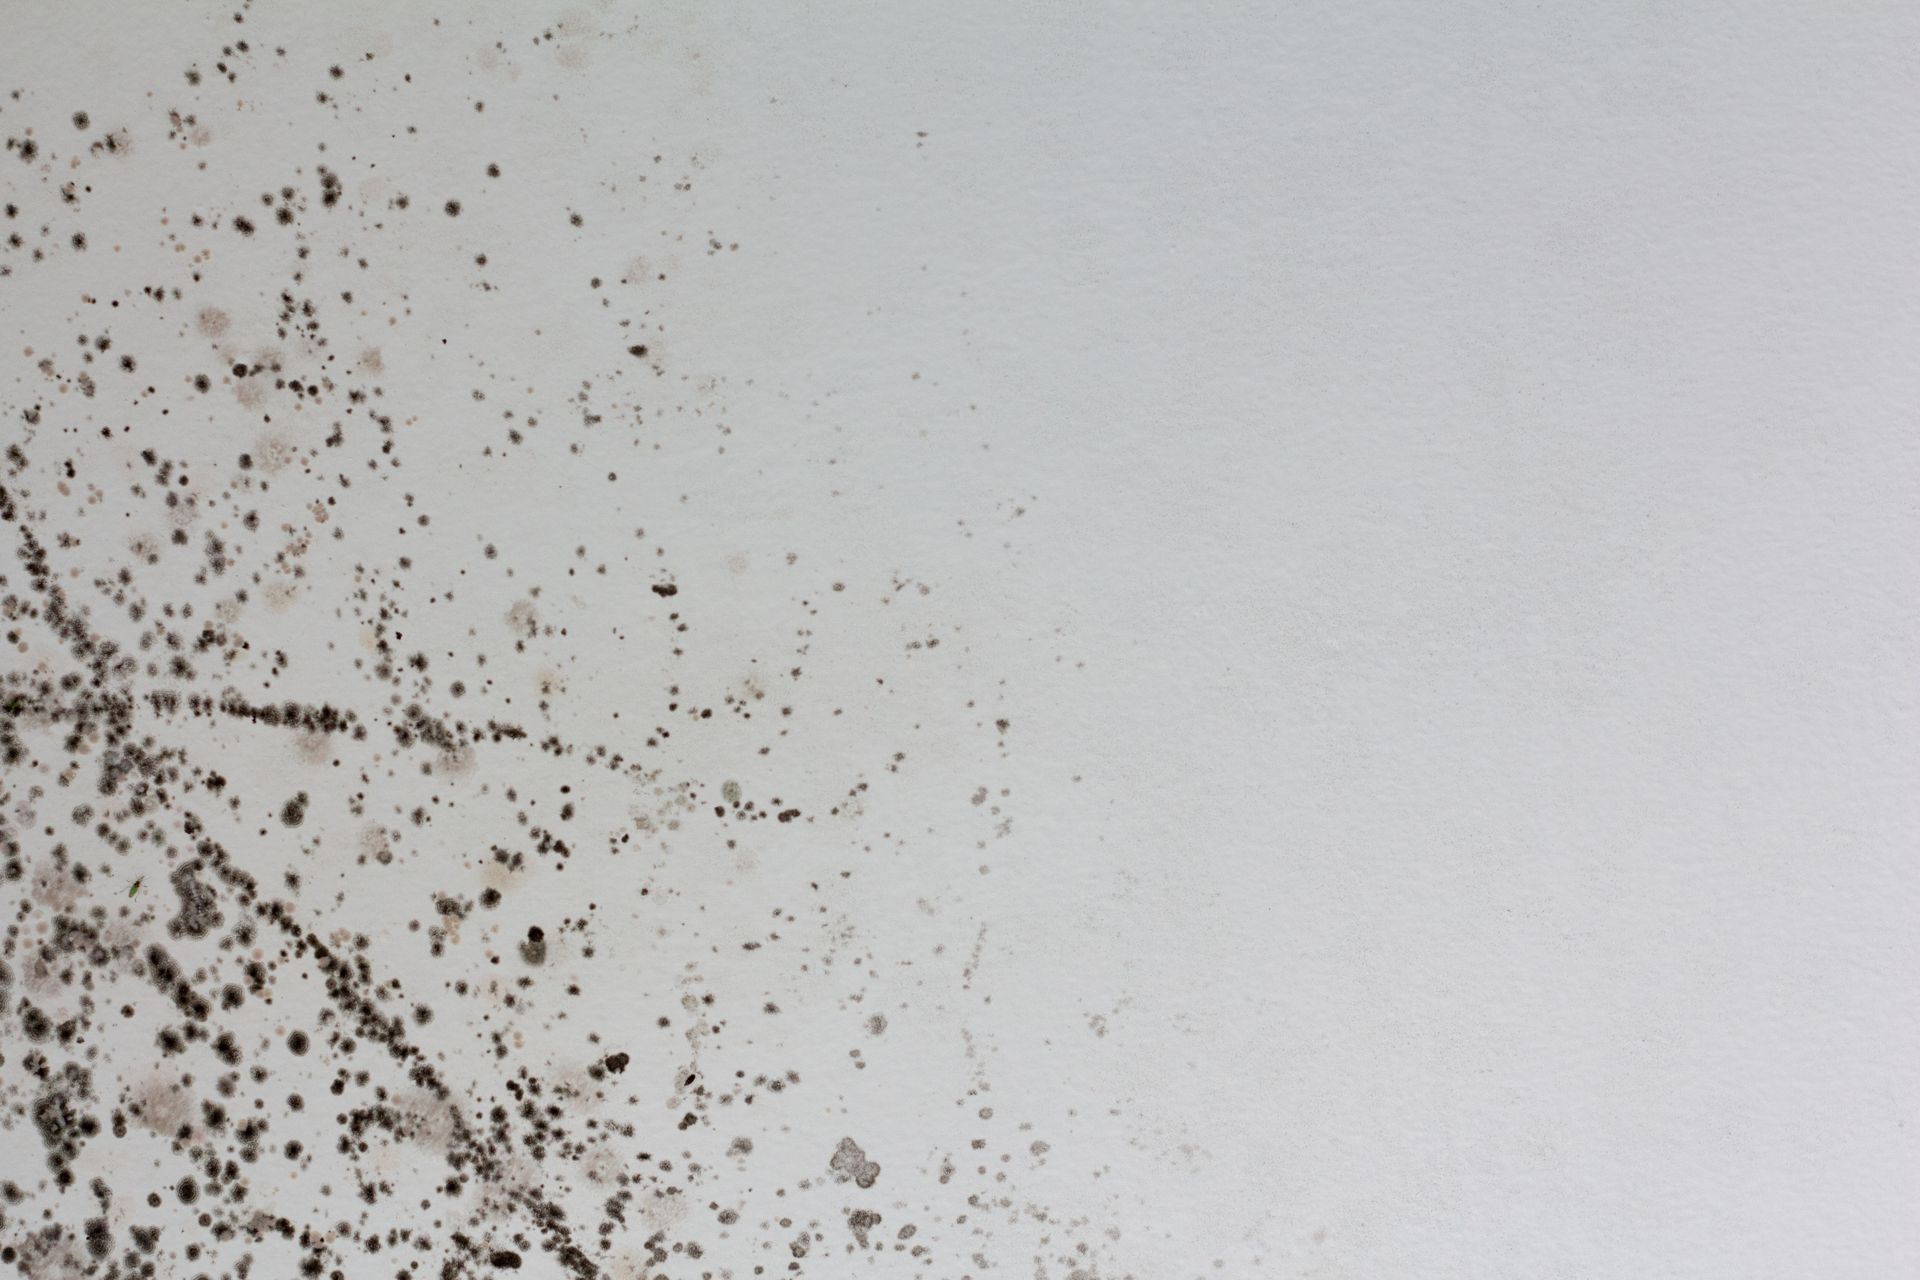 Mold from water damagee on a white wall